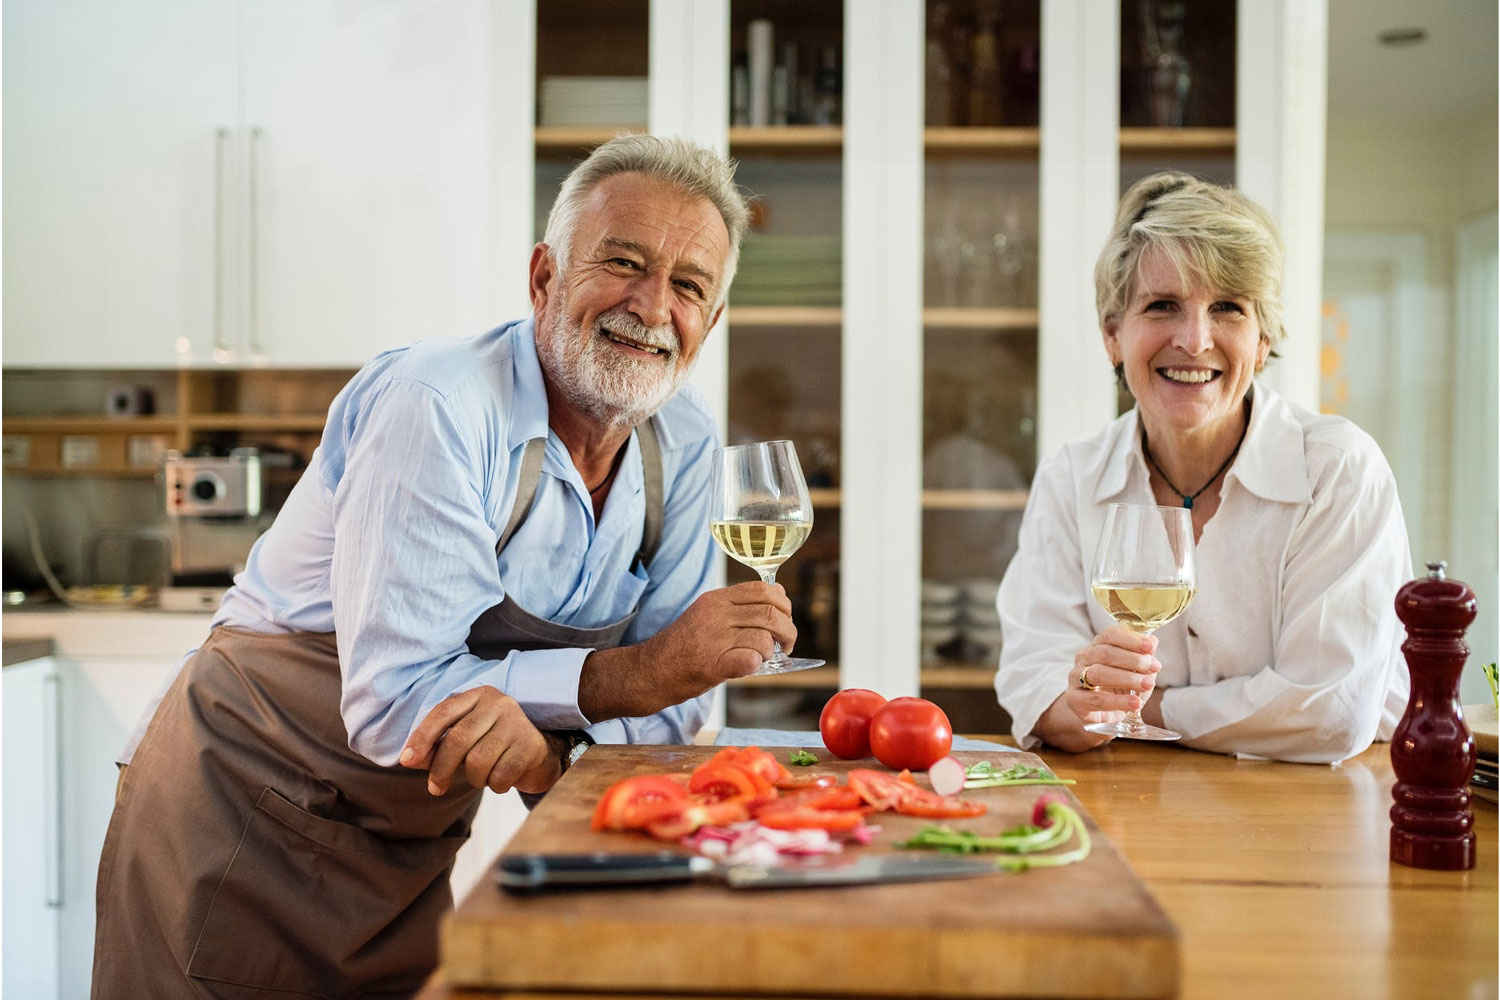 Natural Healthy Lifestyle An Alternative to Growing Old